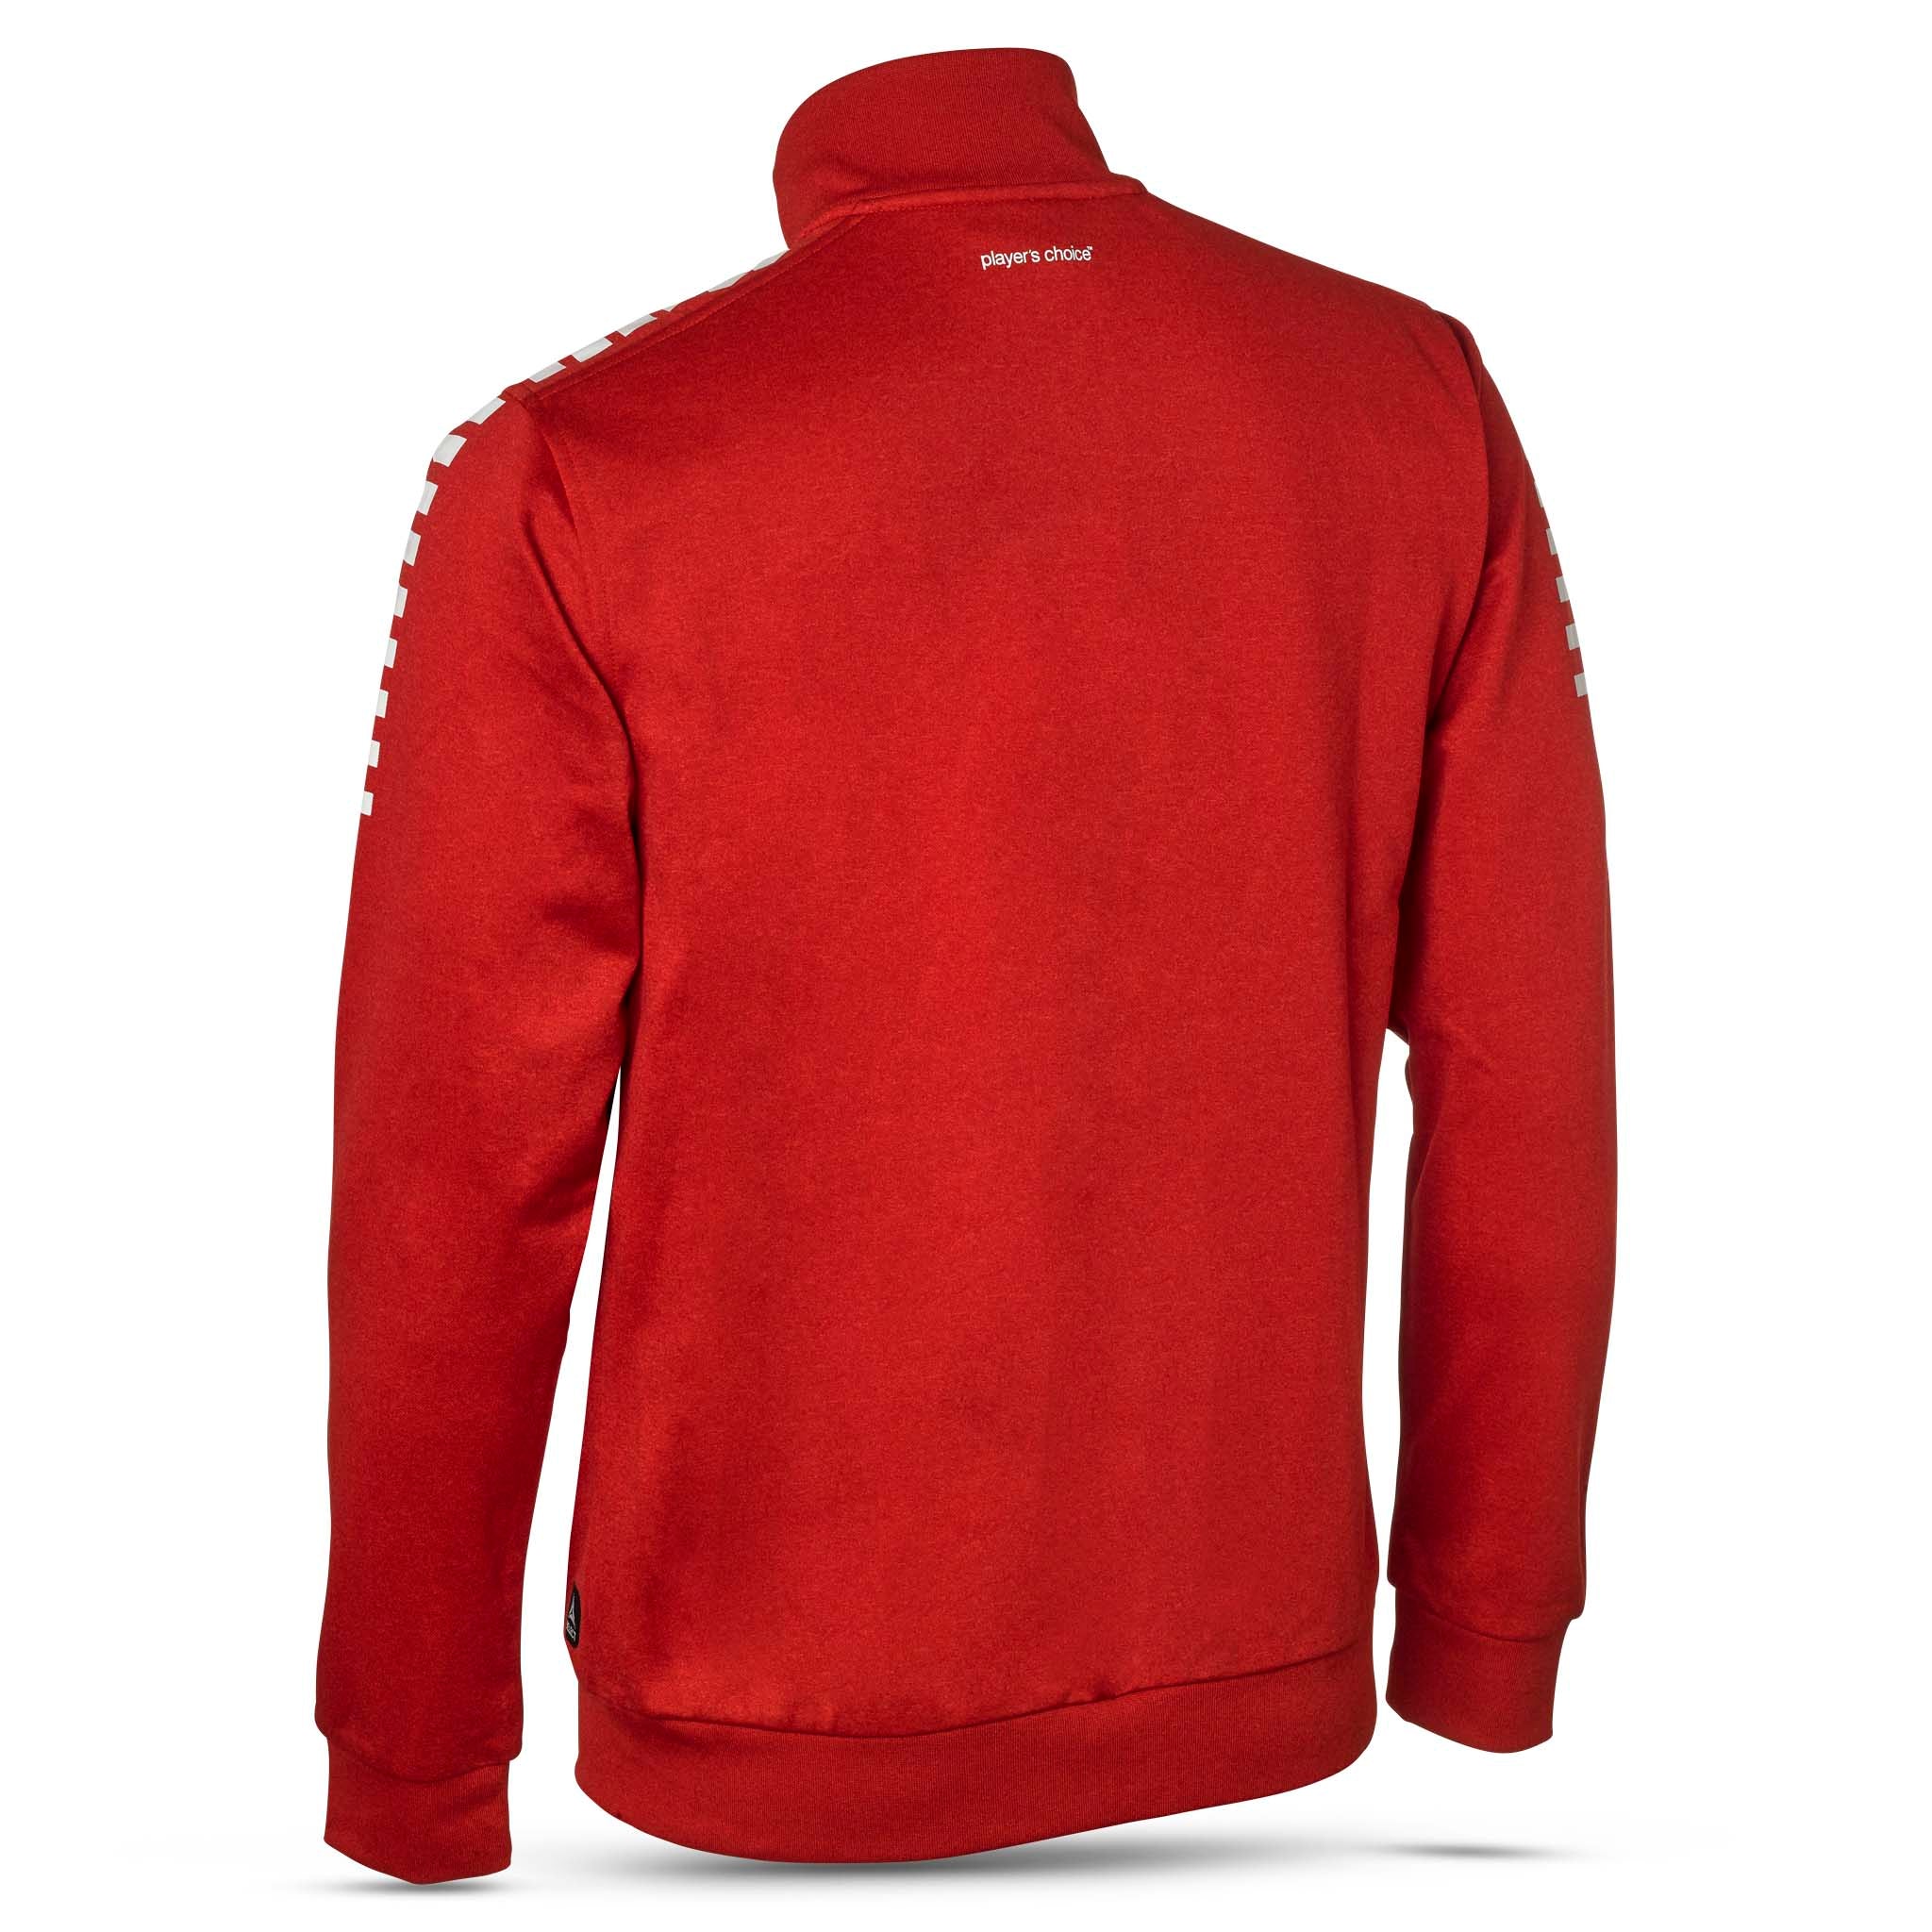 Zip jacket  - Monaco, youth #colour_red